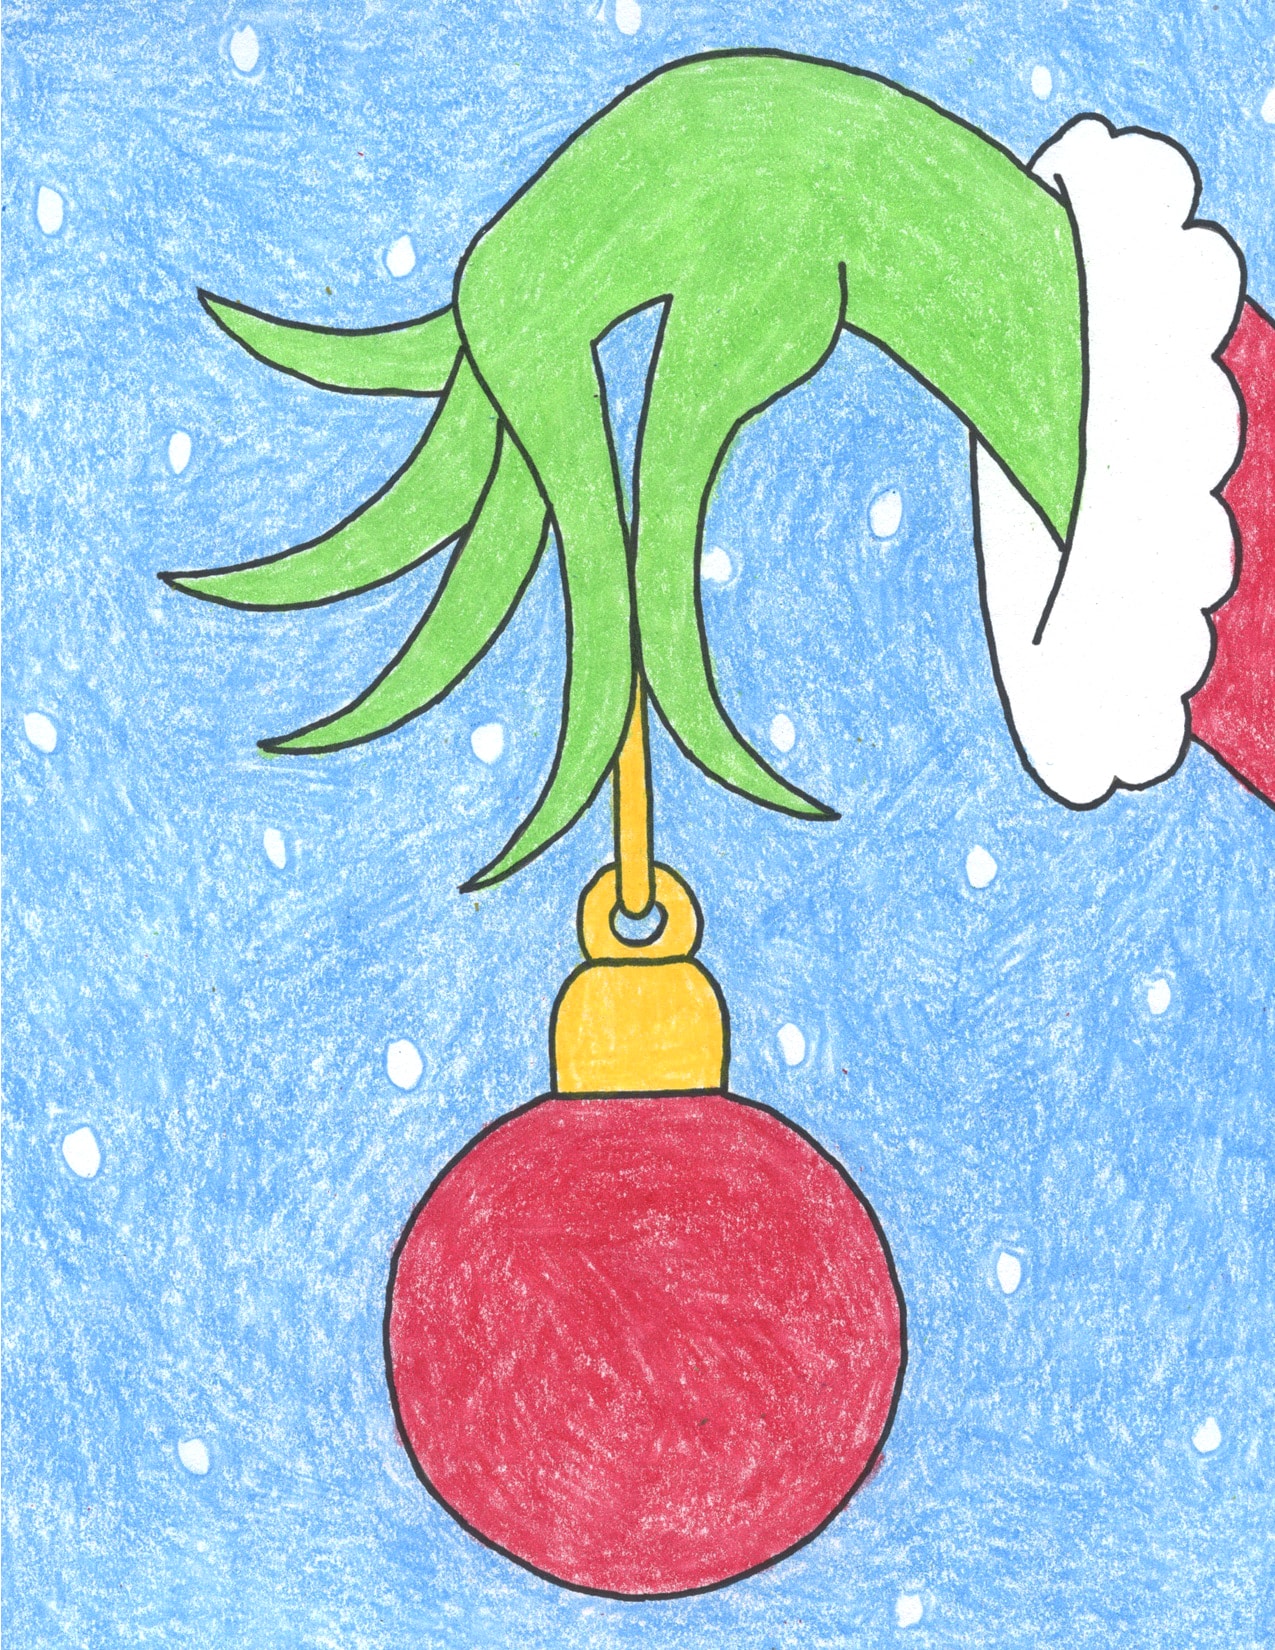 Easy Grinch Hand Drawing Tutorial Video and Grinch Hand Coloring Page